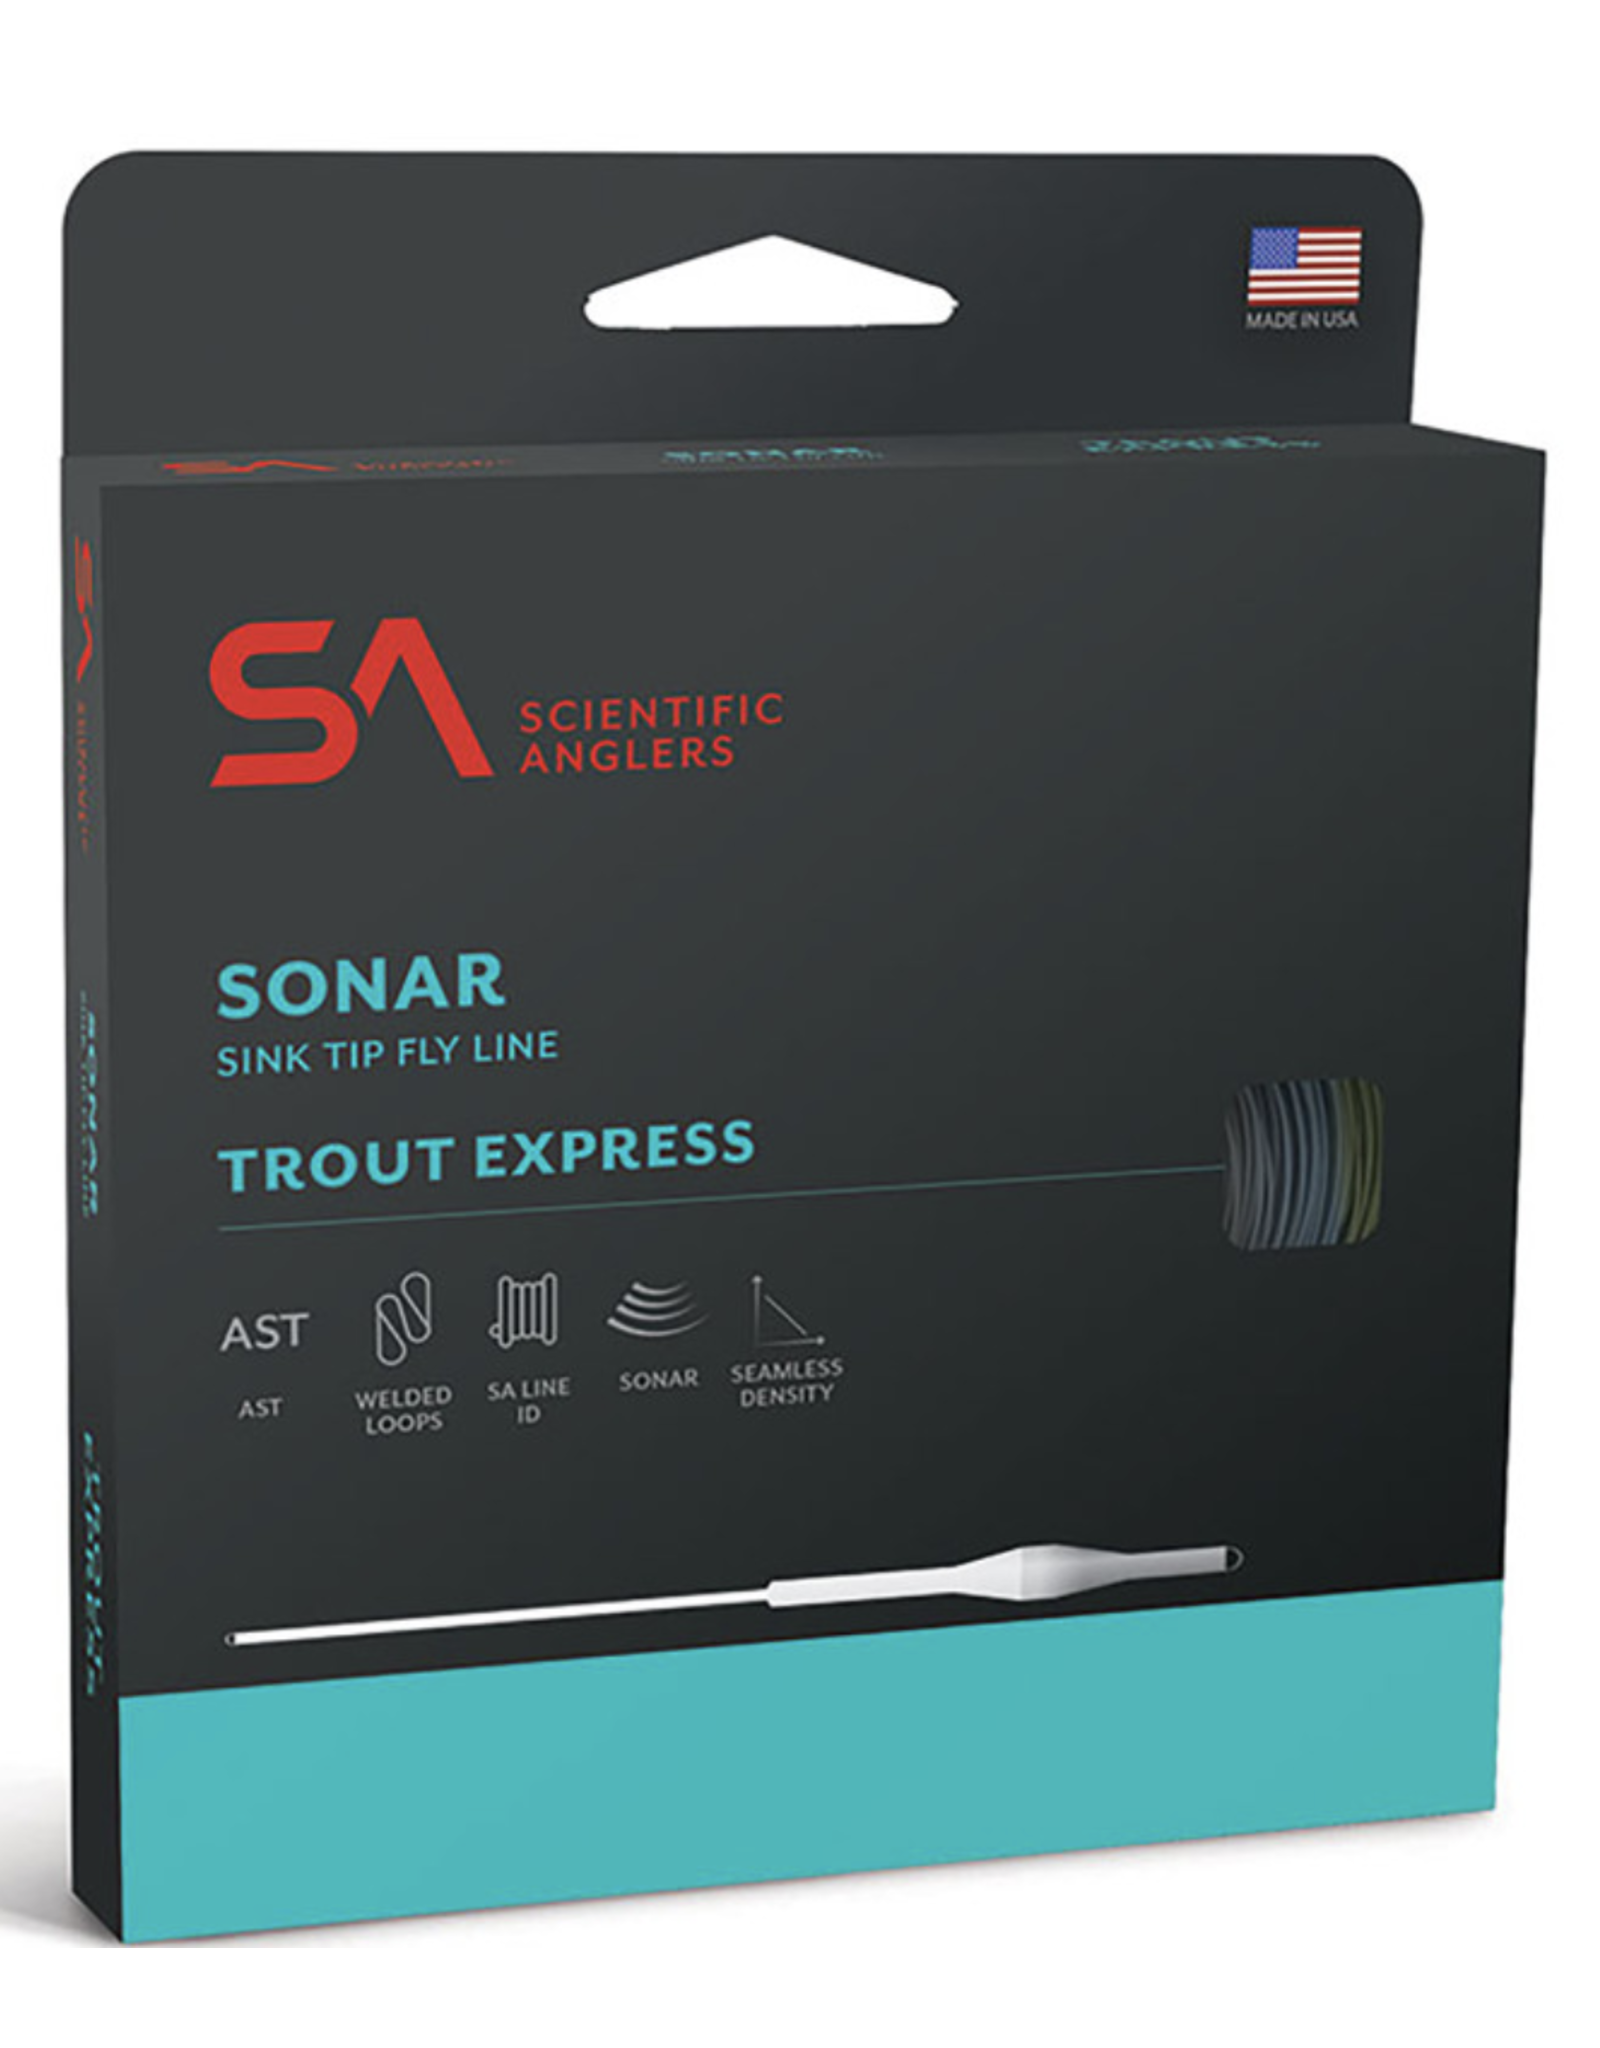 Scientific Anglers Scientific Anglers Sonar Trout Express Sink Tip Fly Line Pale Yellow/Lt Blue/Gray WF-210-F/S